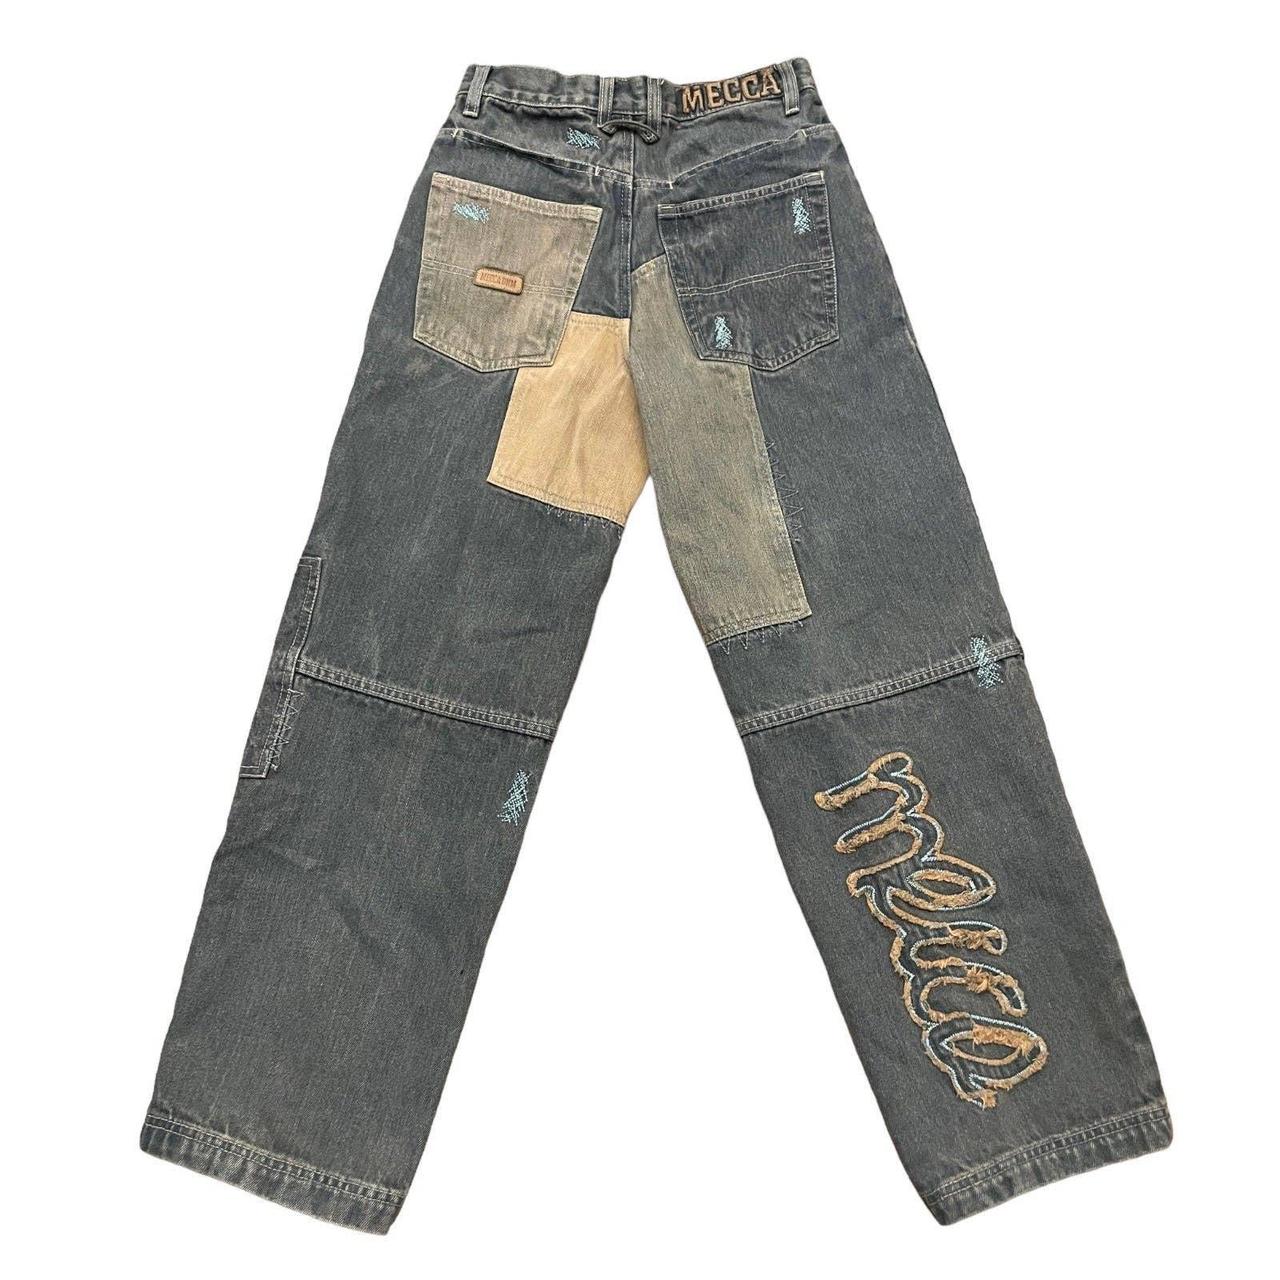 90s Paco Jeans Spell Out Baggy Jeans, 43% OFF